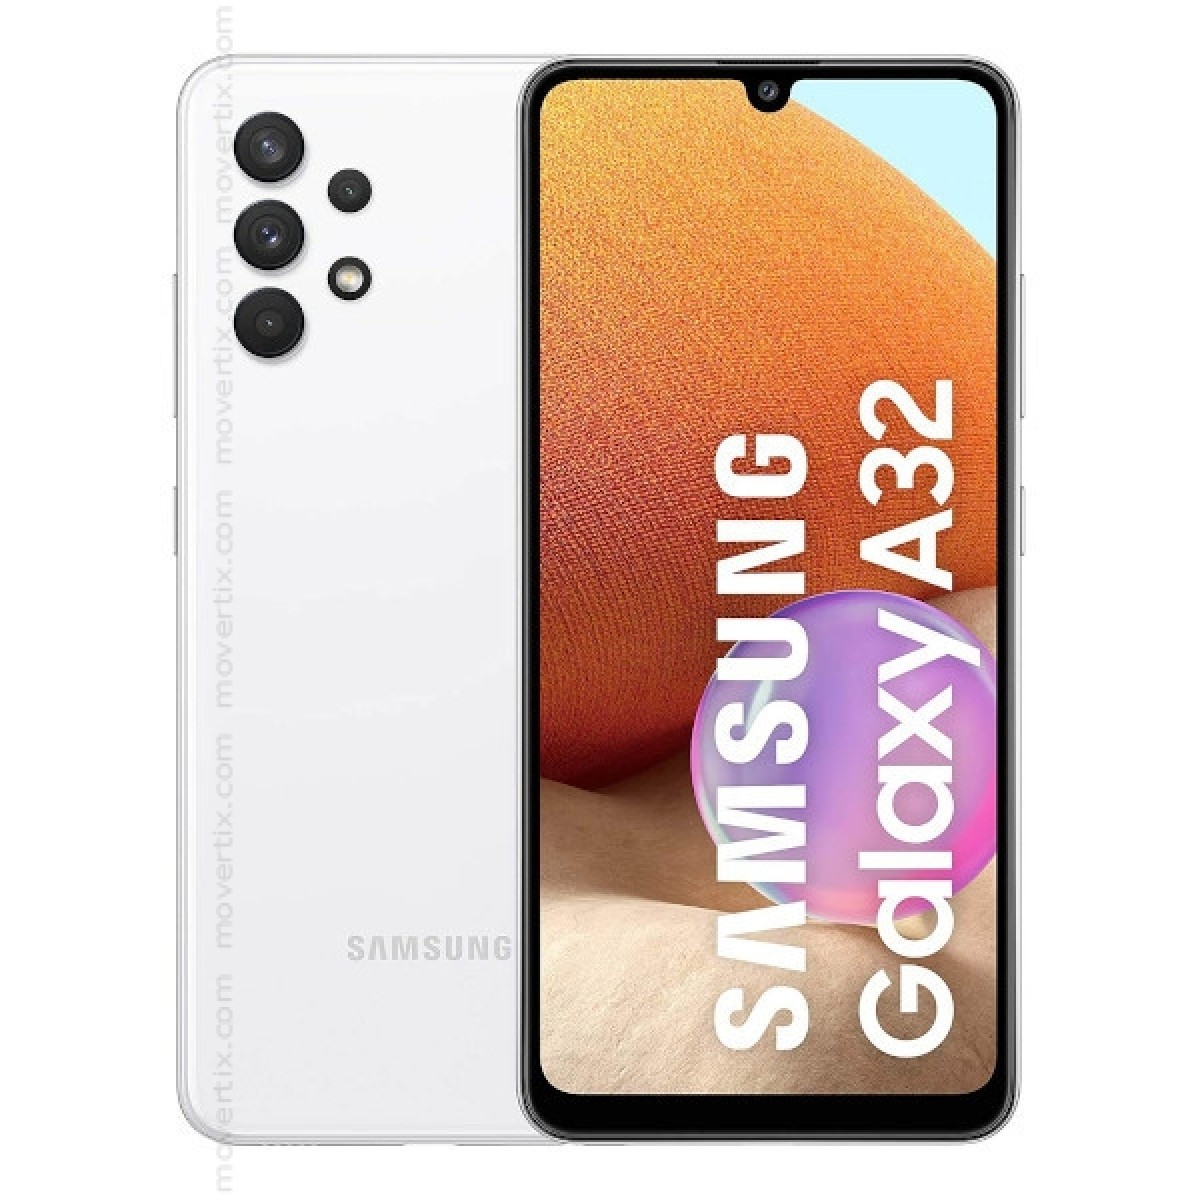 MOBILE PHONE SAMSUNG 6.4 OCTA CORE 1.8GHZ 6GB 128GB DUAL SIM GALAXY A32 WHITE OB, Android Smartphone